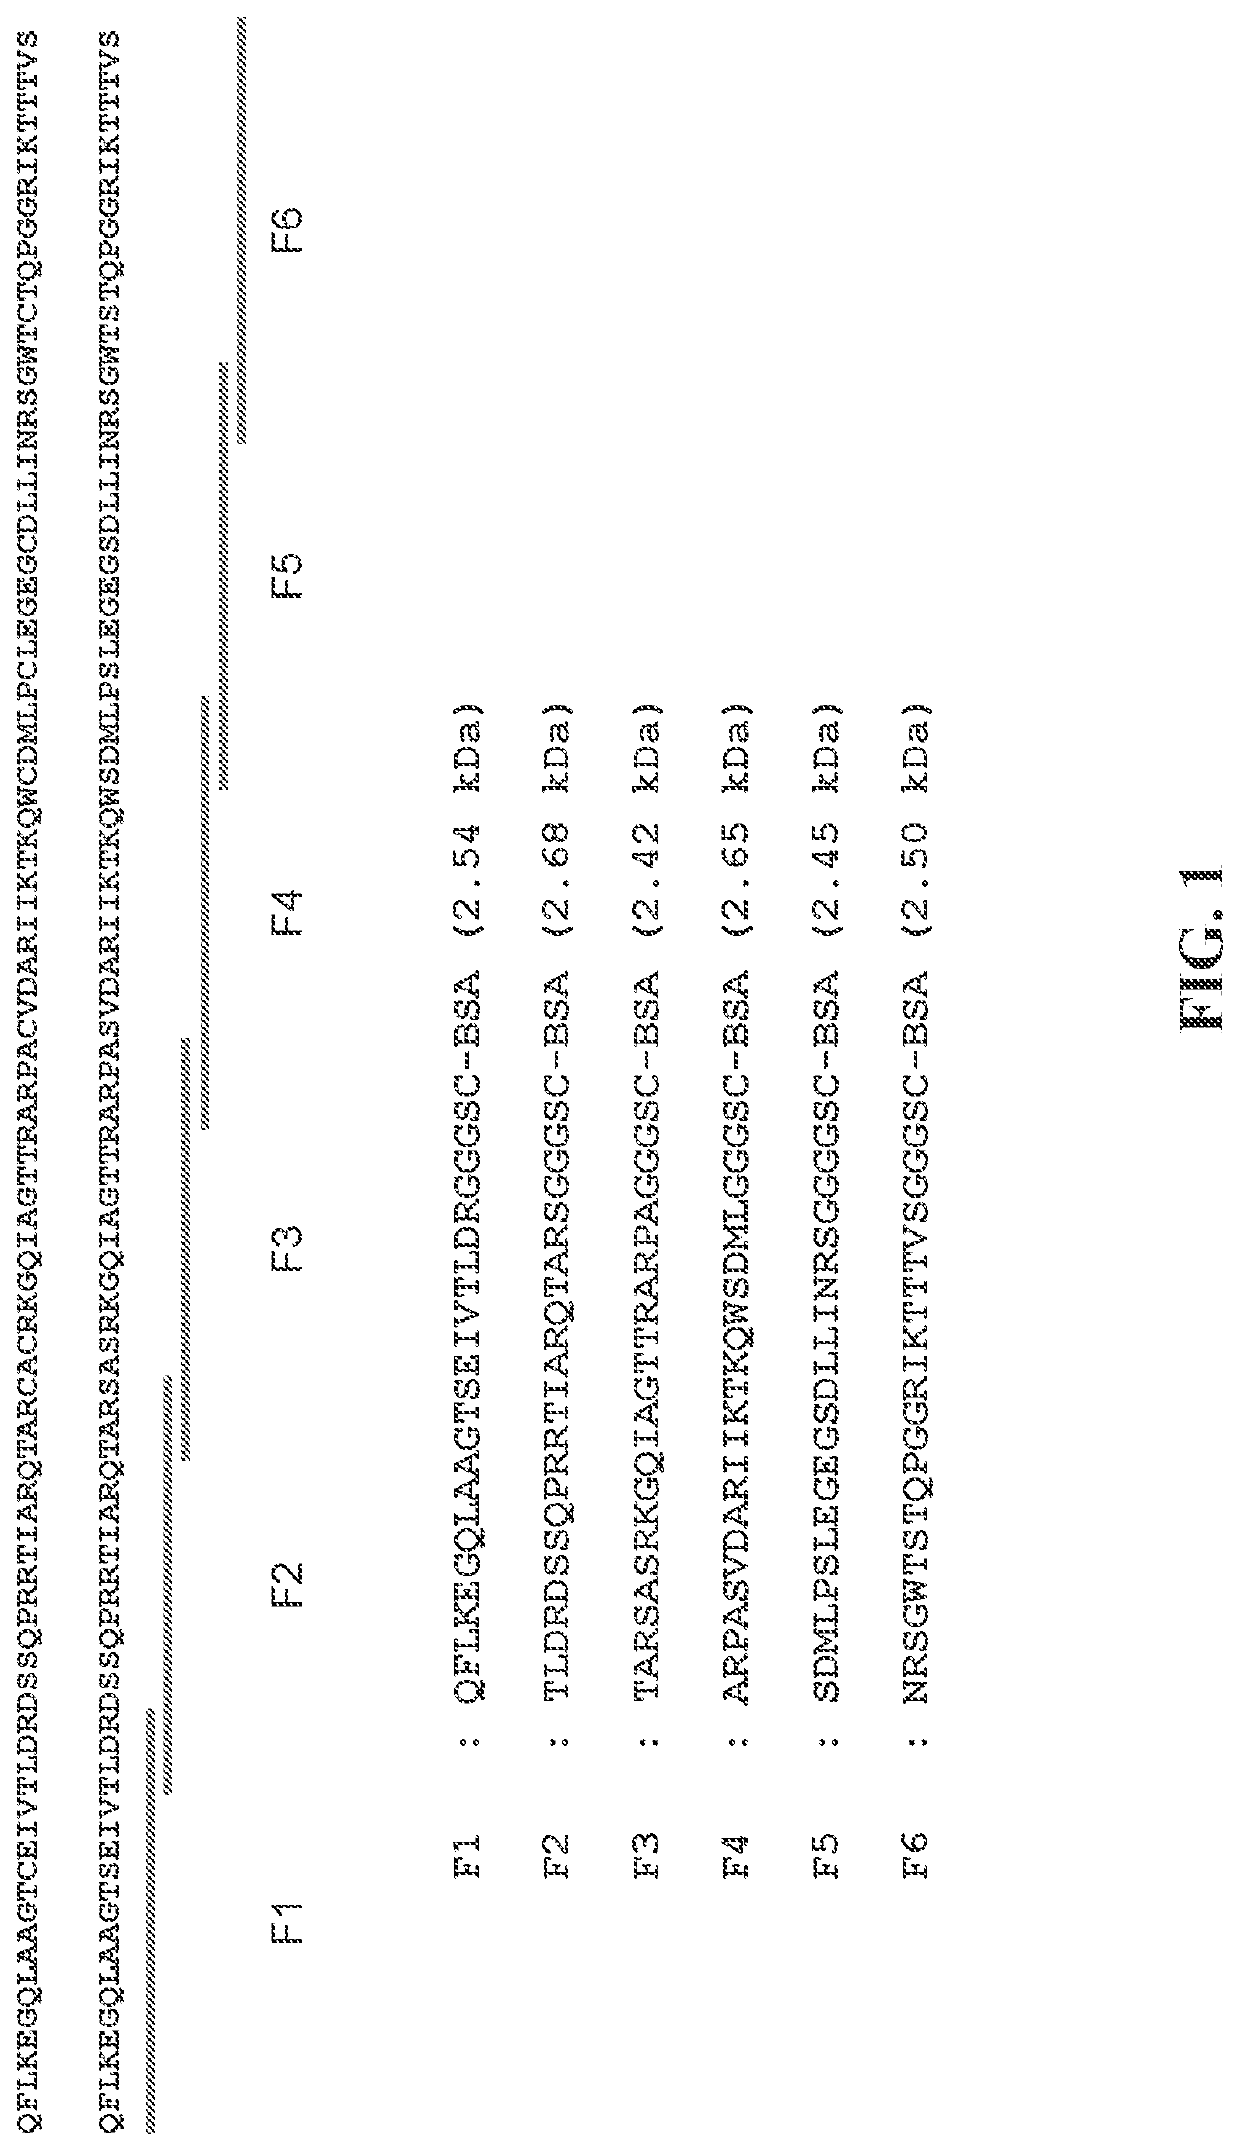 Anti-fam19a5 antibodies and uses thereof